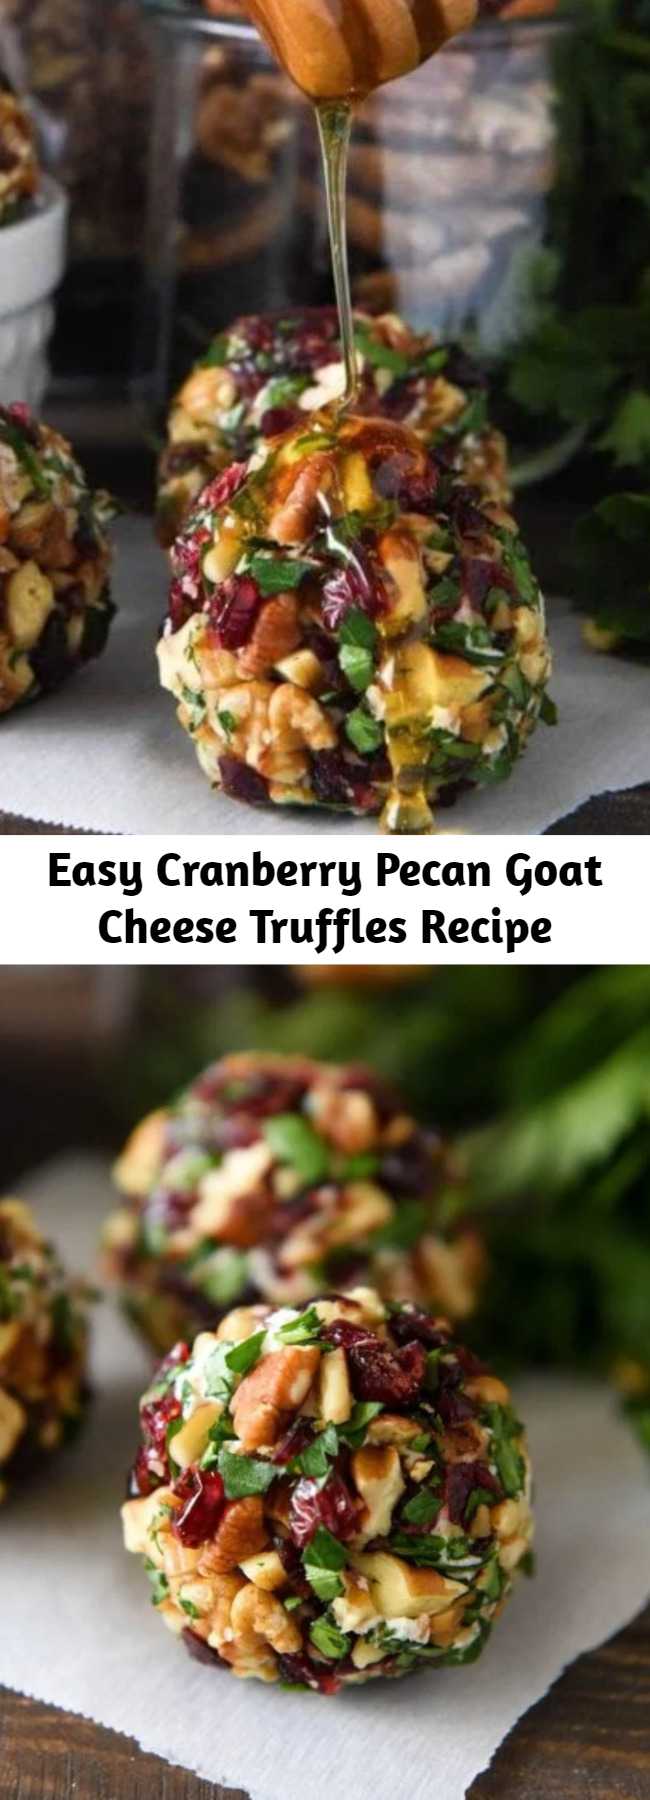 Easy Cranberry Pecan Goat Cheese Truffles Recipe - These festive mini cheese balls only take 15 minutes to make! Drizzle them with honey to really take them over the top! #CranberryPecanGoatCheeseTruffles #Truffles #GoatCheeseTruffles #CheeseBall #Appetizer #Christmas #NewYears #ChristmasAppetizers #GoatCheese #Cranberries